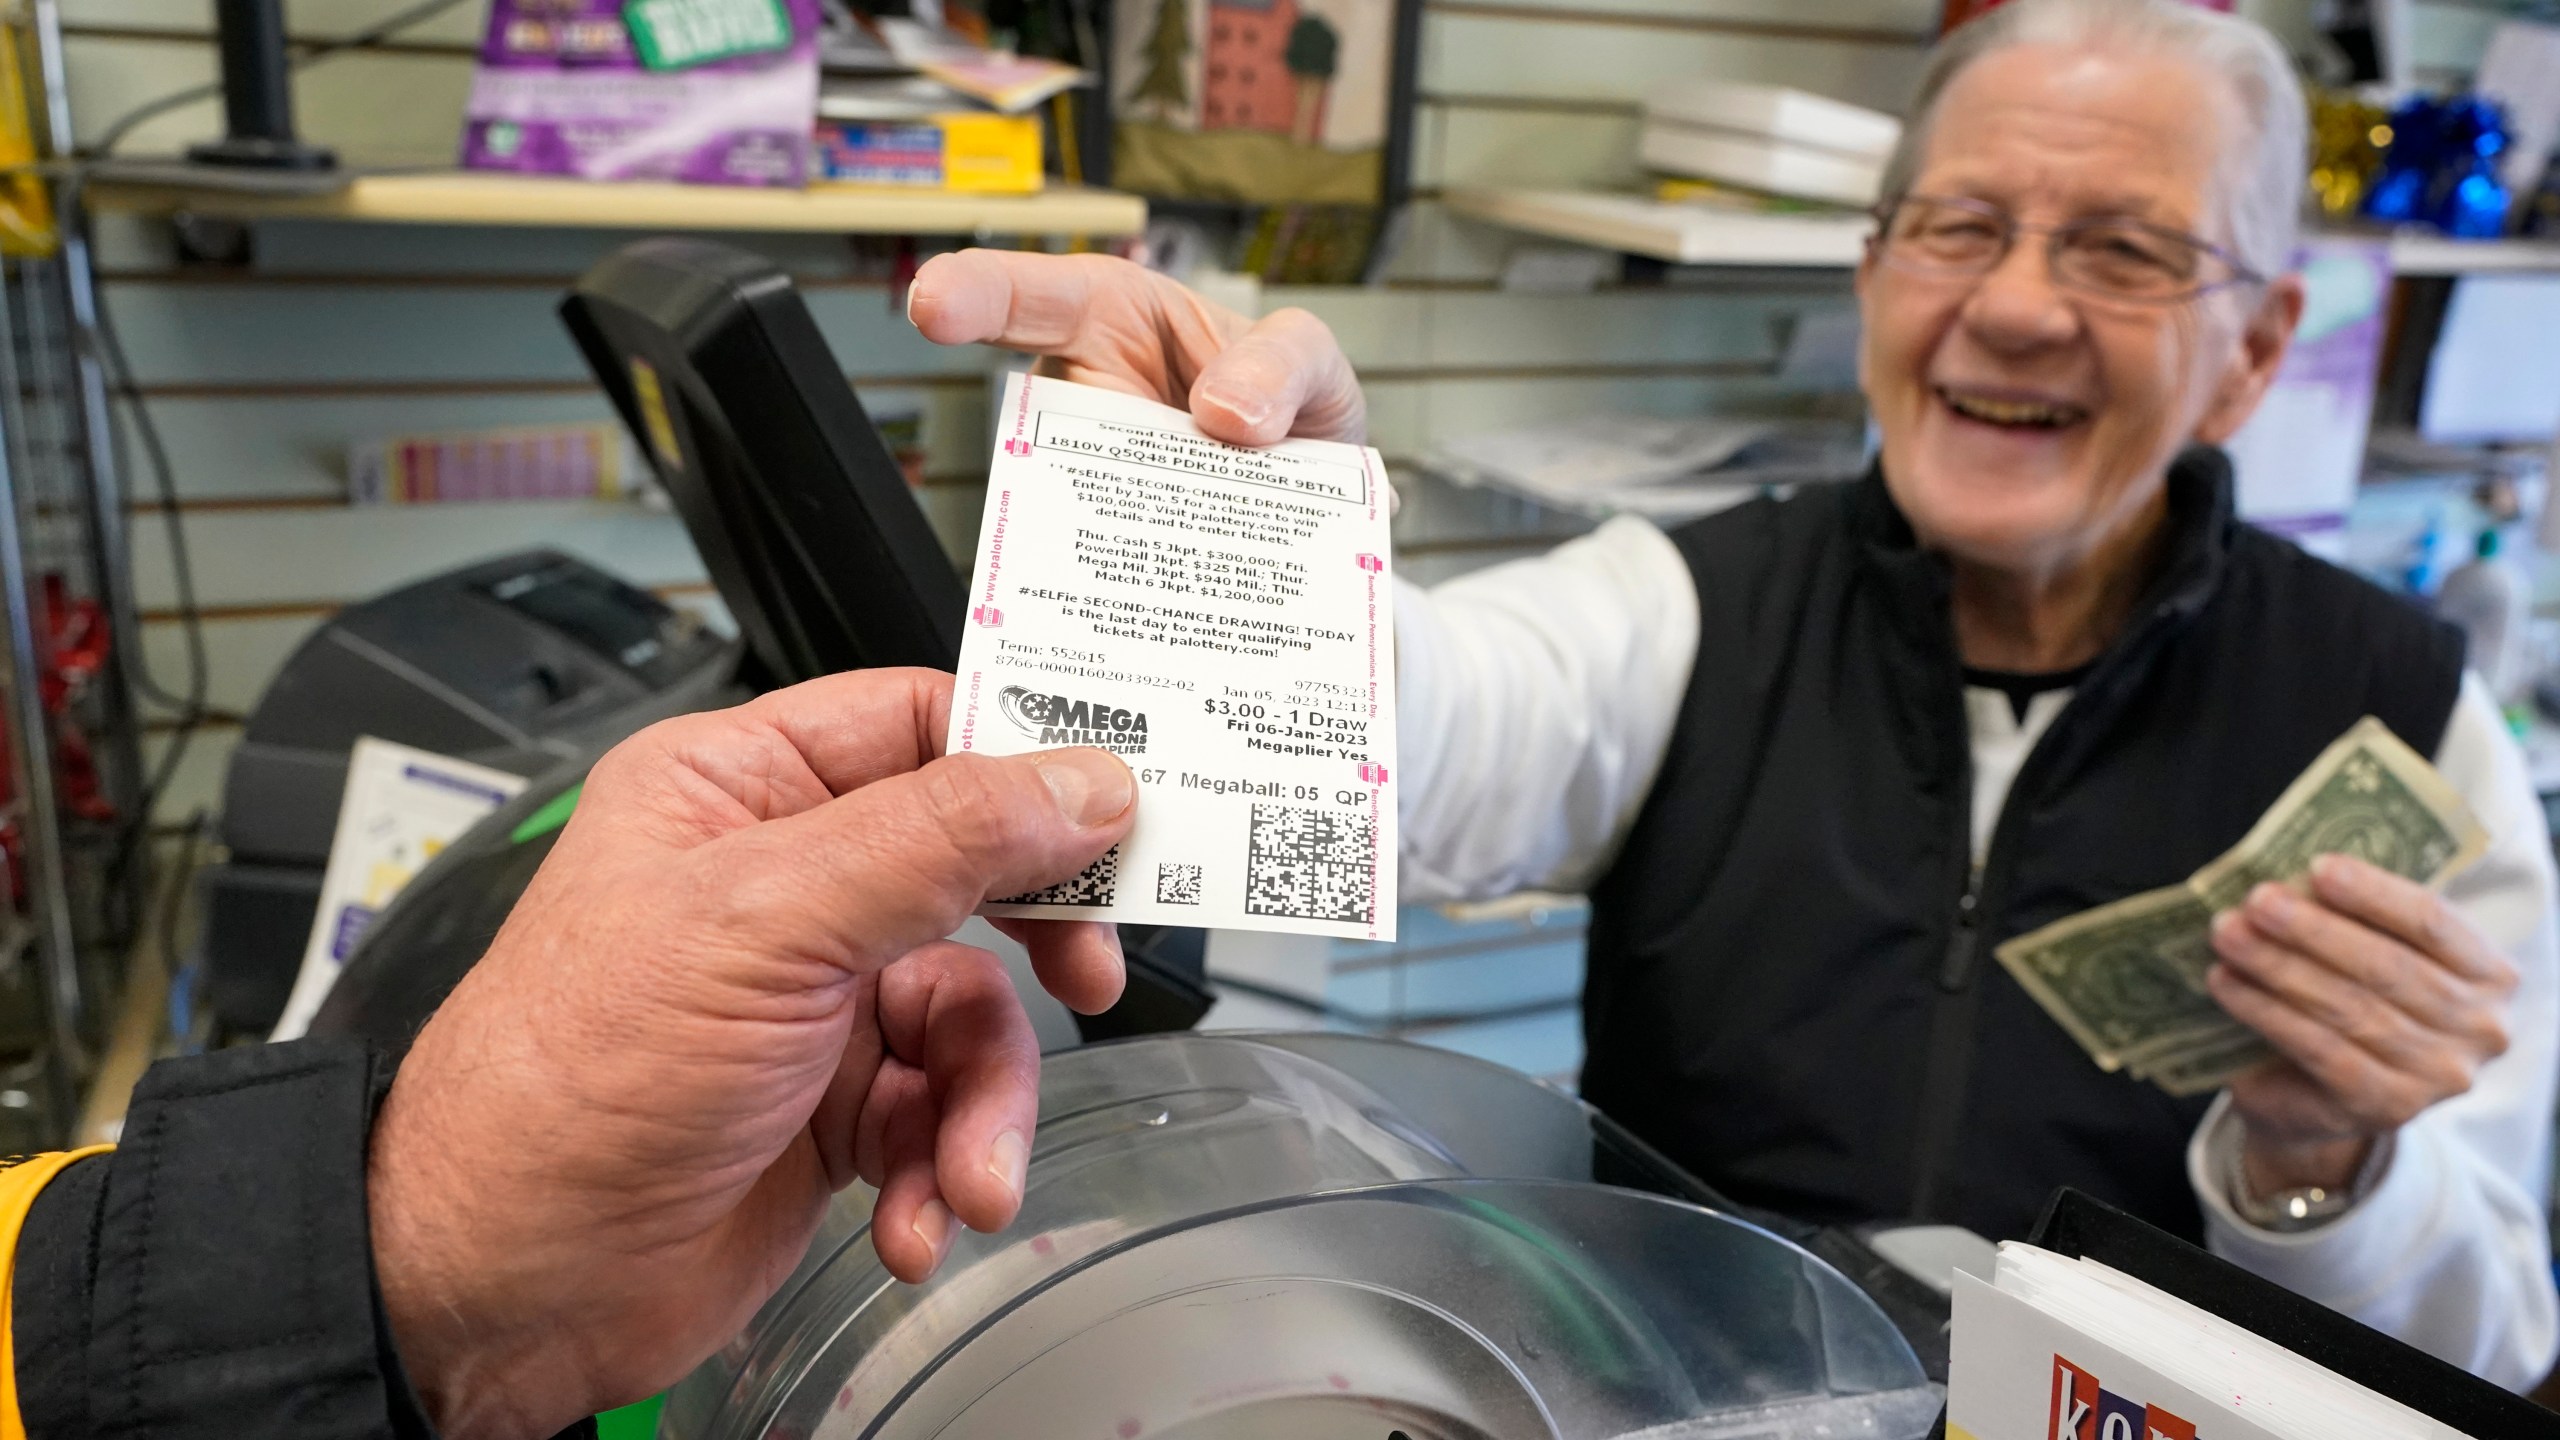 FILE - Dot Skoko, owner of Dot's Dollar More or Less shop in Mt. Lebanon, Pa., hands a customer a Mega Millions lottery ticket, Thursday, Jan. 5, 2022. The Mega Millions jackpot has reached an astounding $977 million for Friday night’s drawing after no tickets matched all six numbers drawn on Tuesday night. (AP Photo/Gene J. Puskar, File)